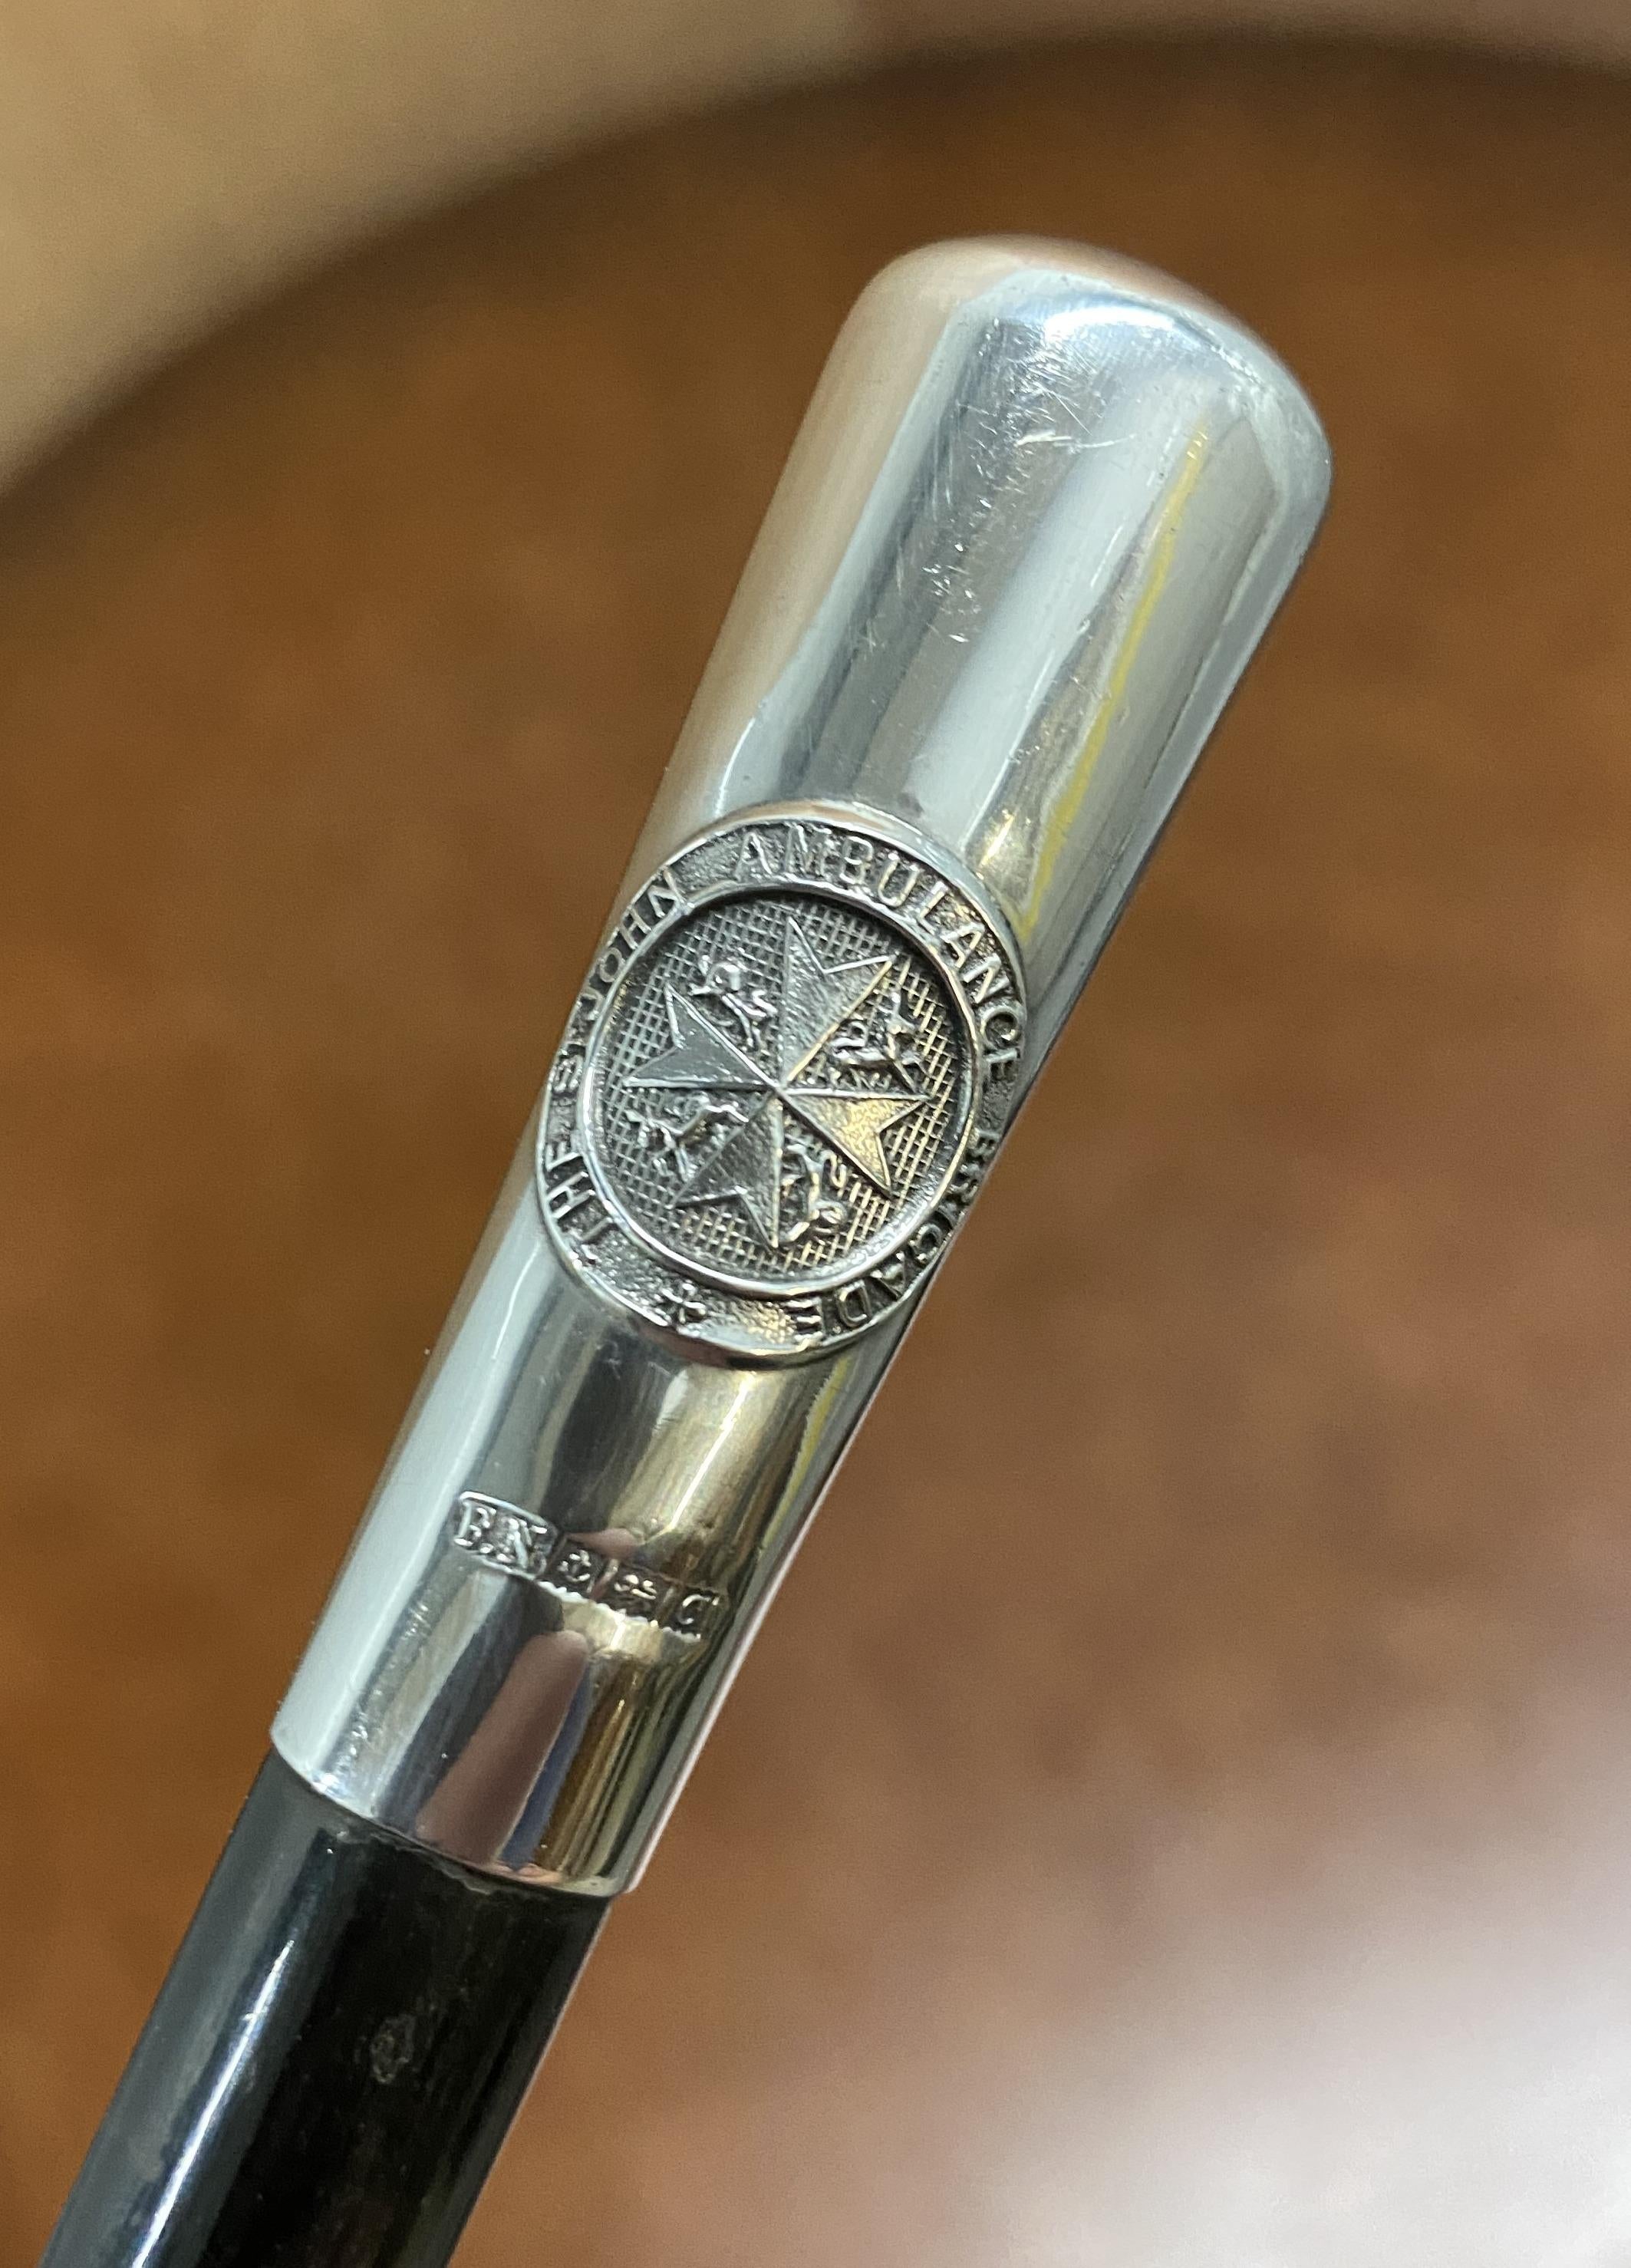 We are delighted to offer this lovely original 1952 fully stamped and hallmarked sterling silver St Johns Ambulance swagger stick

The top mount has the St Johns Ambulance motif, it's hallmarked with the ships anchor for Birmingham, the sideways